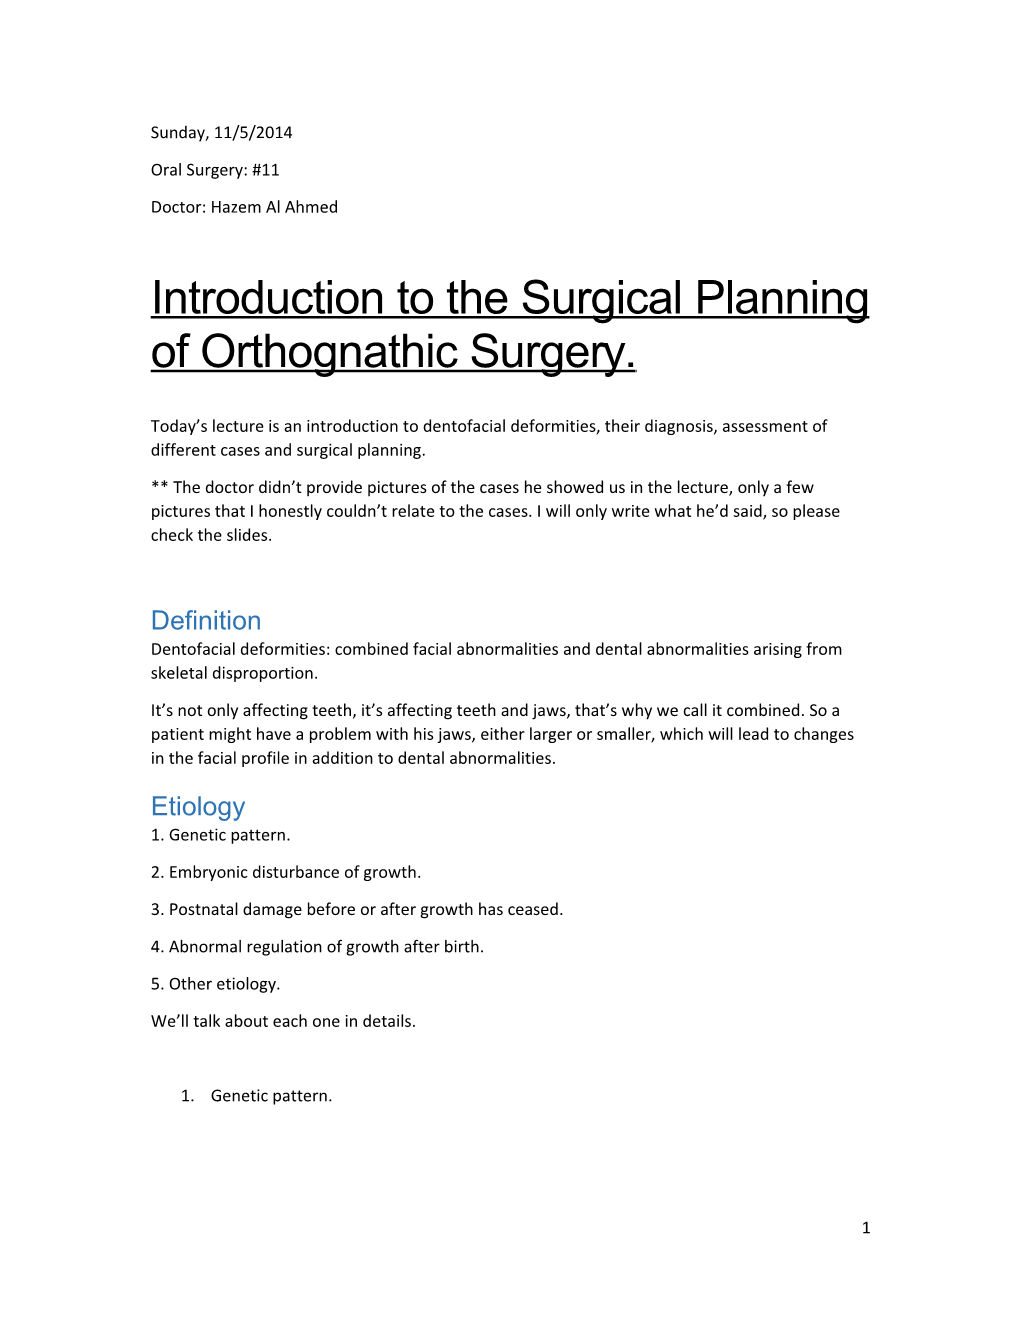 Introduction to the Surgical Planning of Orthognathic Surgery